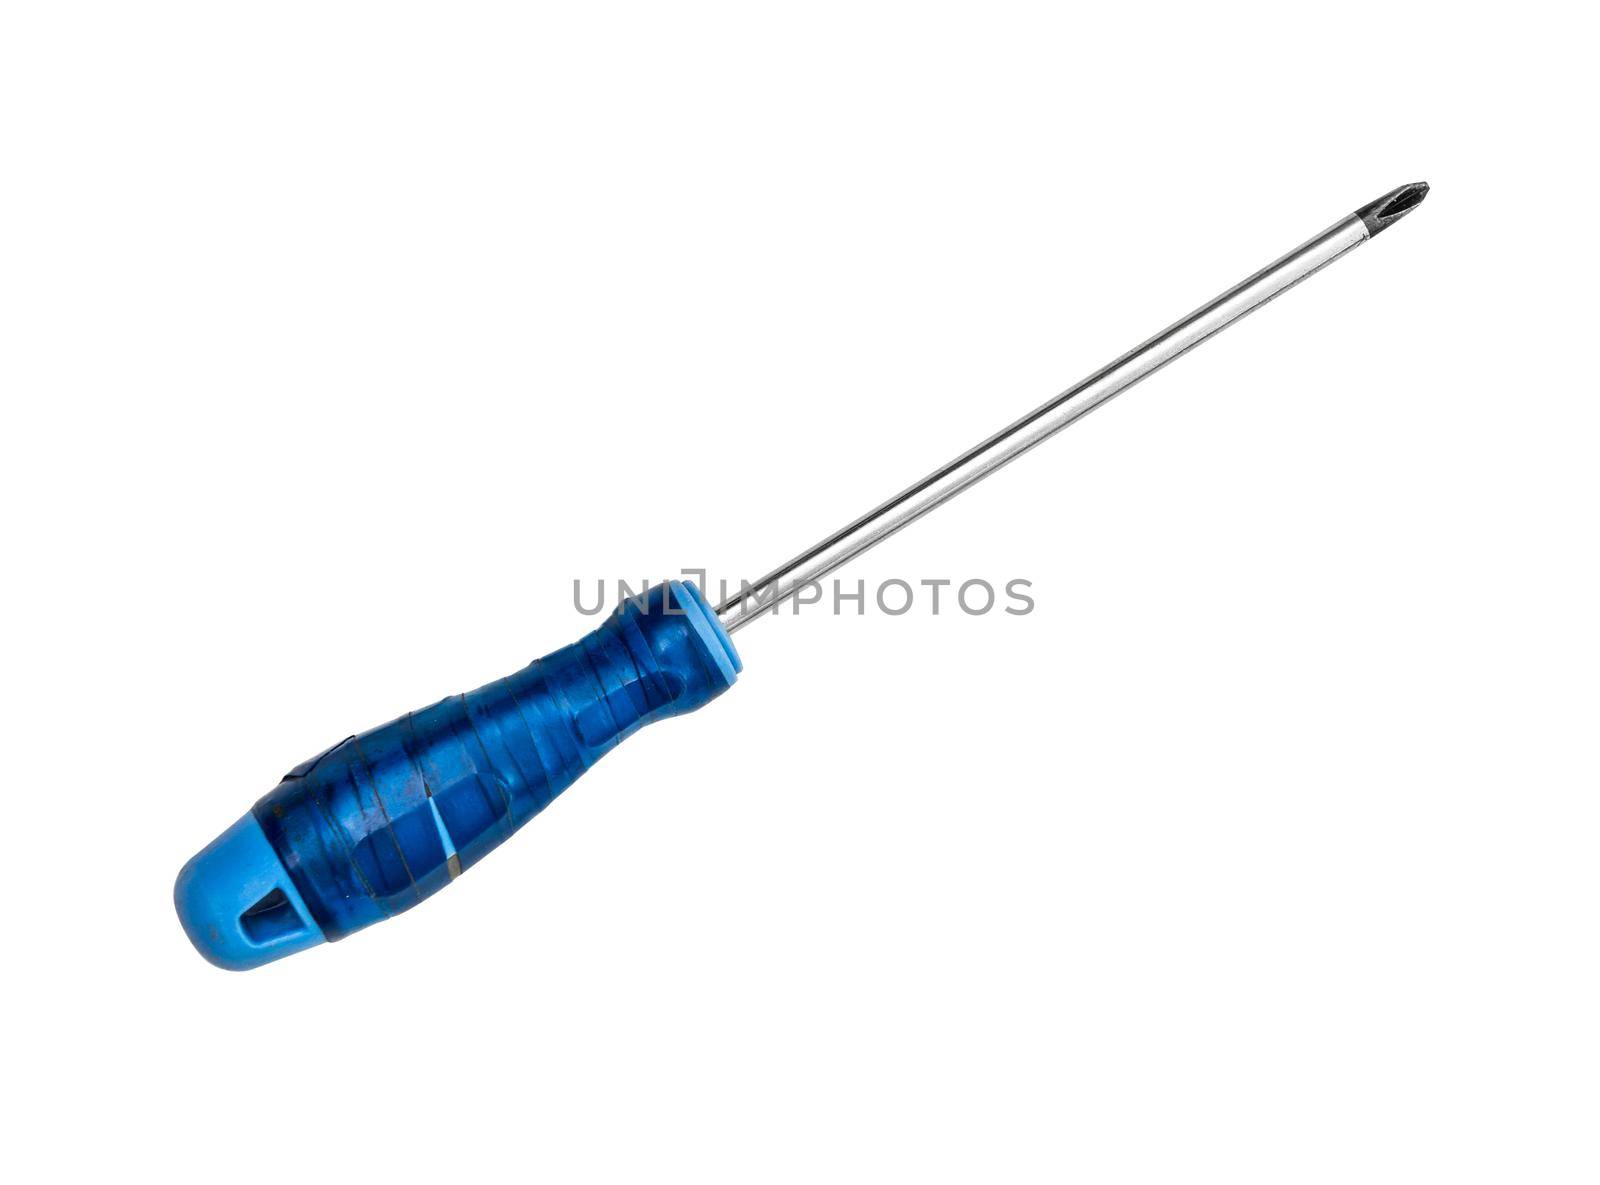 Screwdriver isolated by tan4ikk1